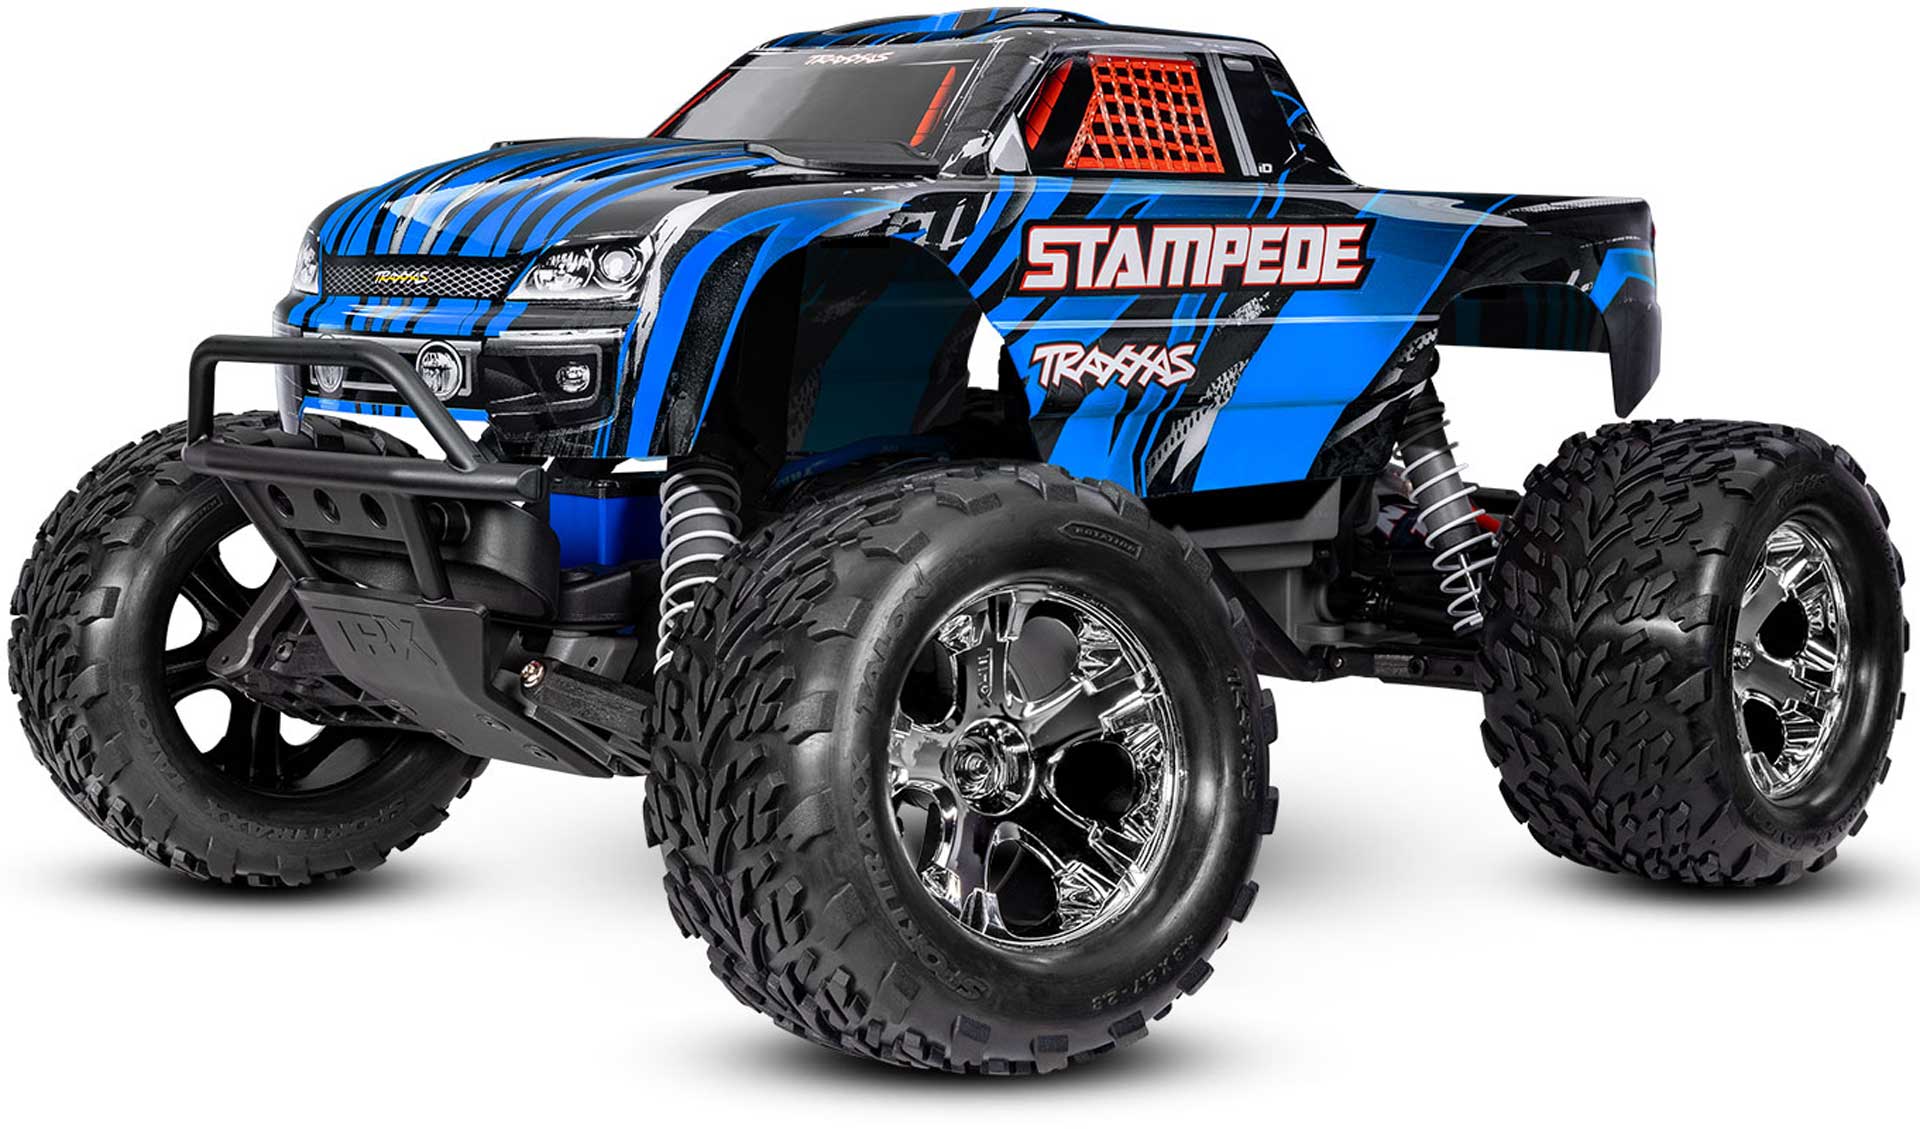 TRAXXAS STAMPEDE BLUE 1/10 2WD MONSTER-TRUCK RTR BRUSHED, HD, WITH BATTERY AND 4AMPER